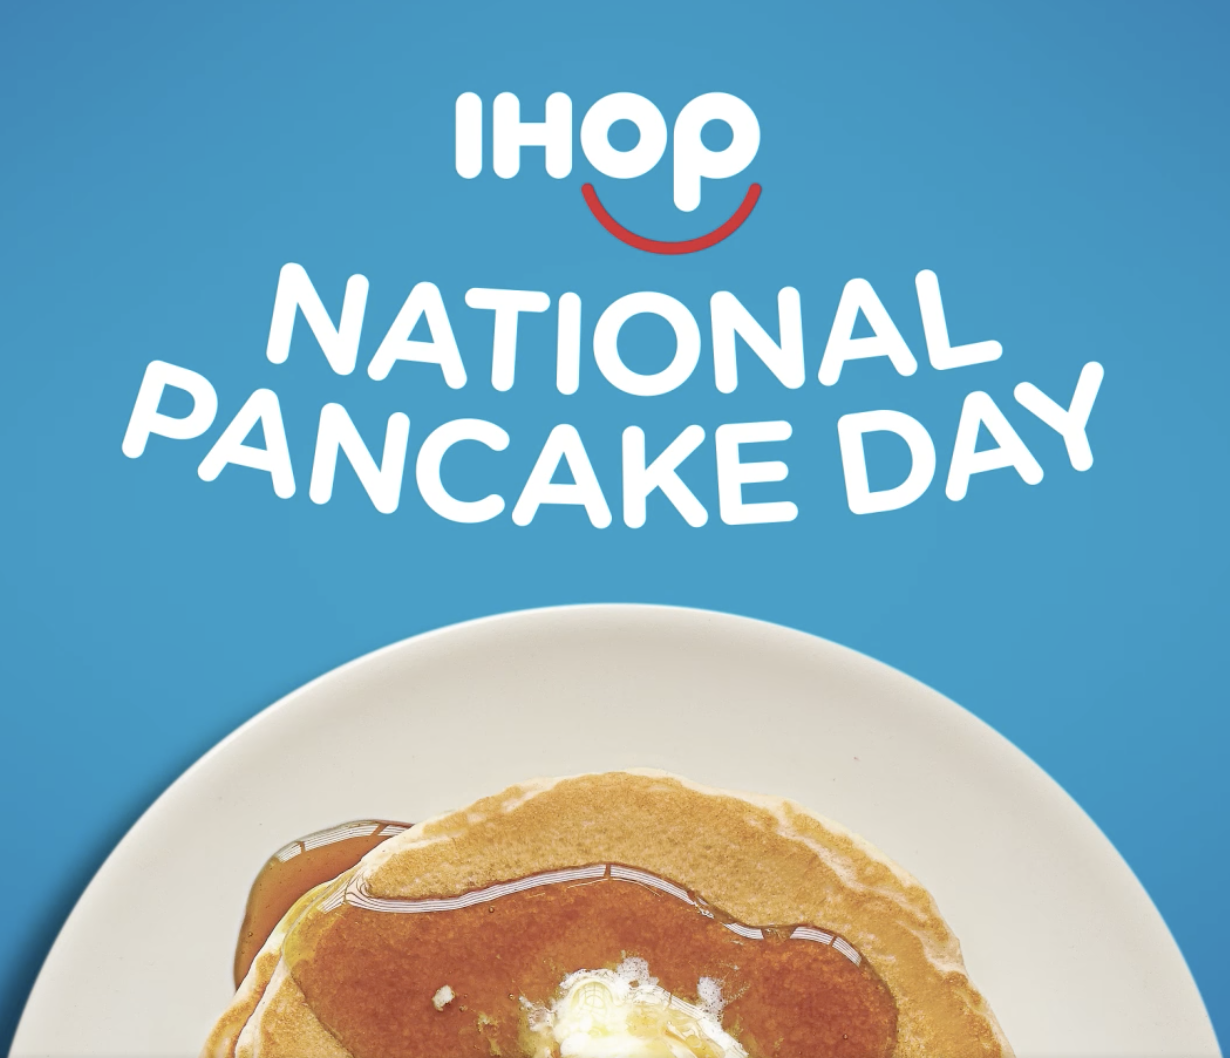 How to get free IHOP pancakes today 